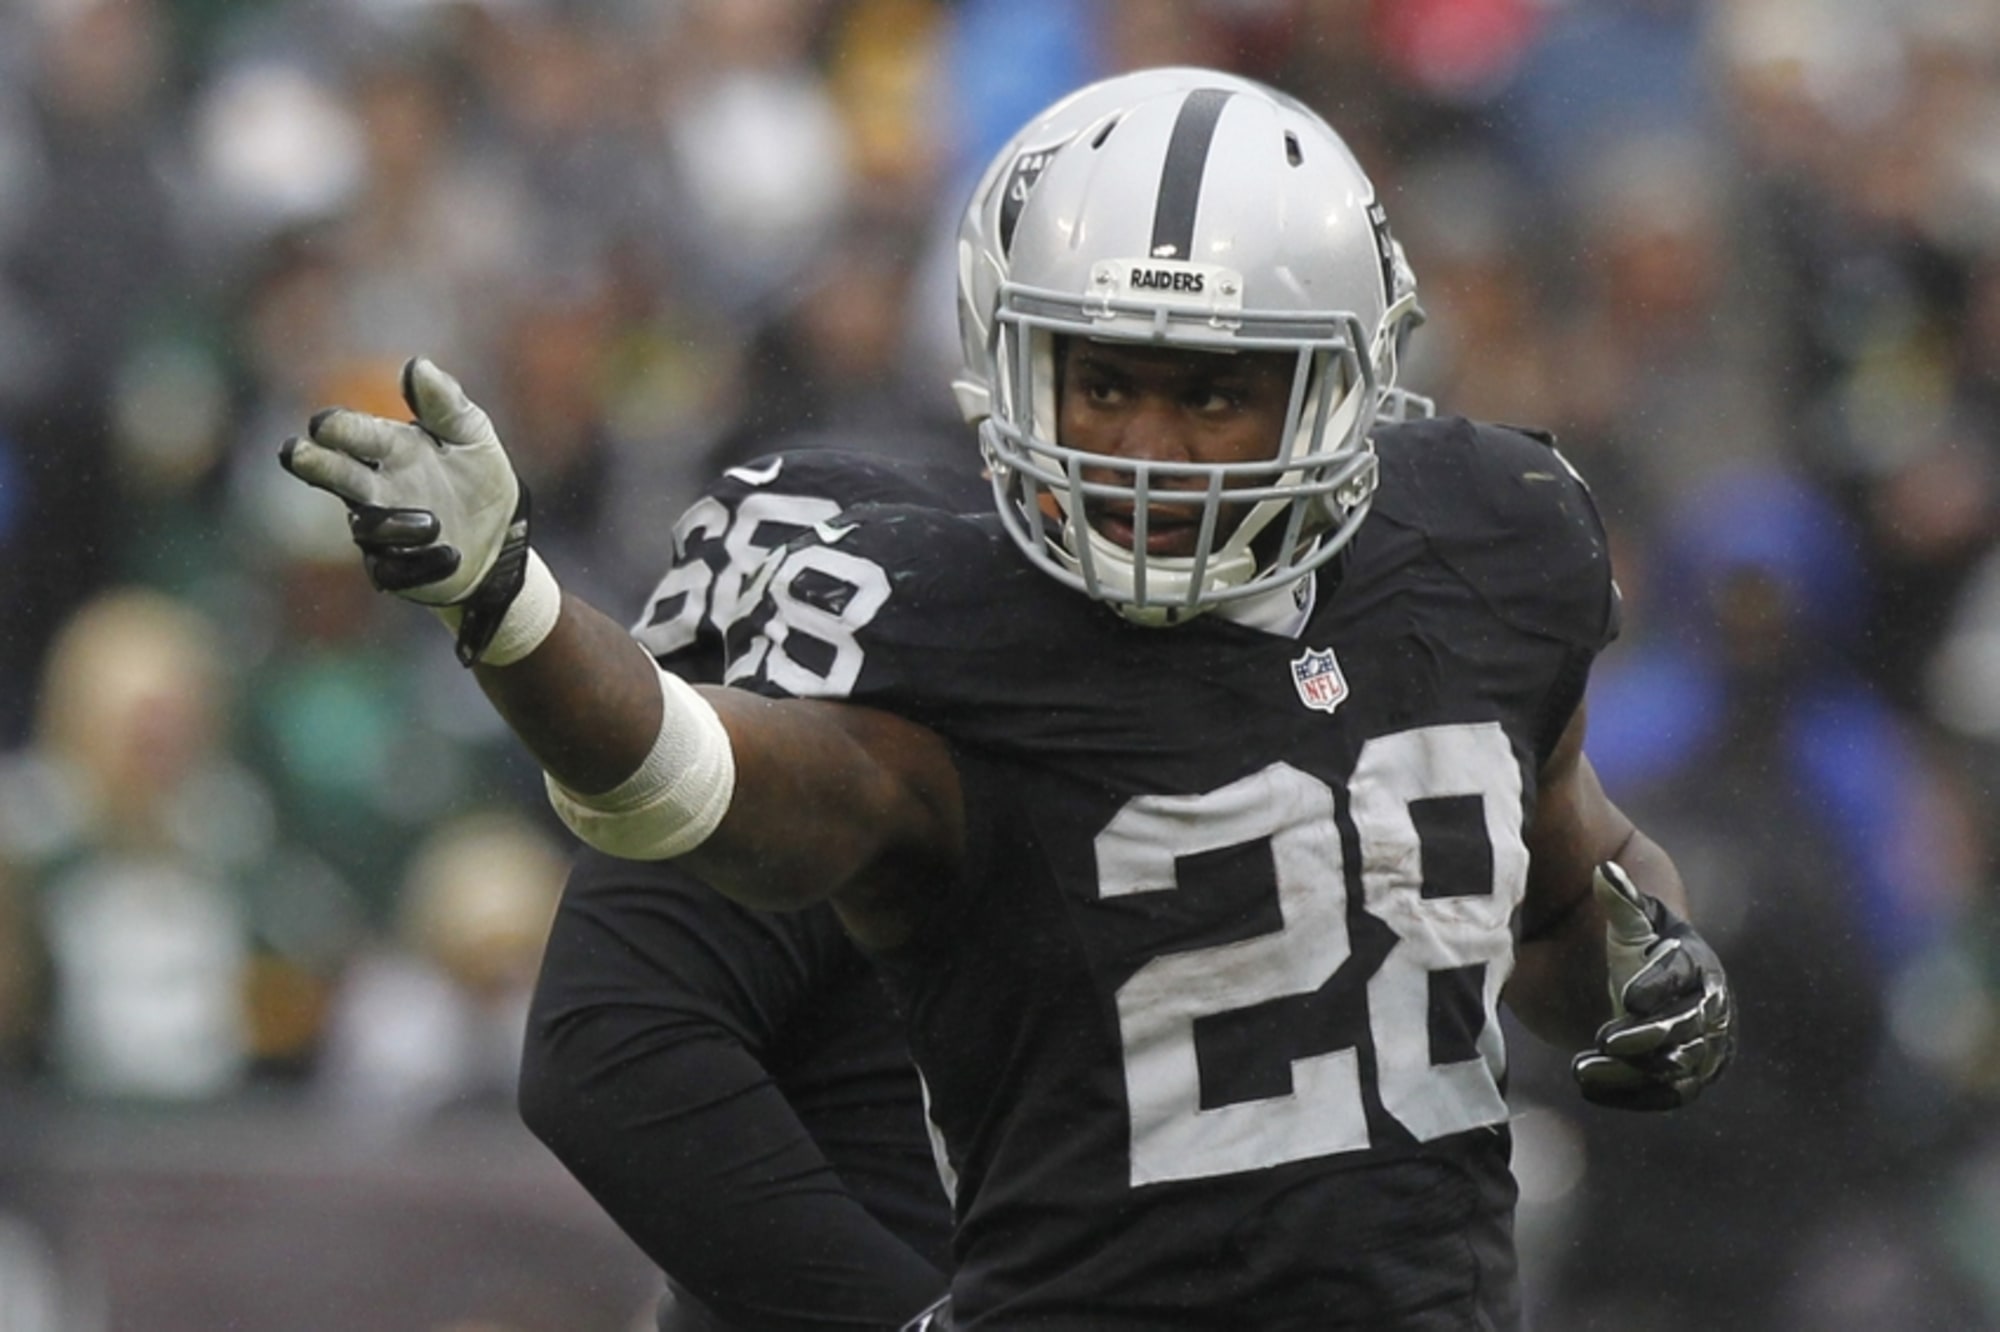 ABC30 Action News - The Oakland Raiders take on the Texans tonight